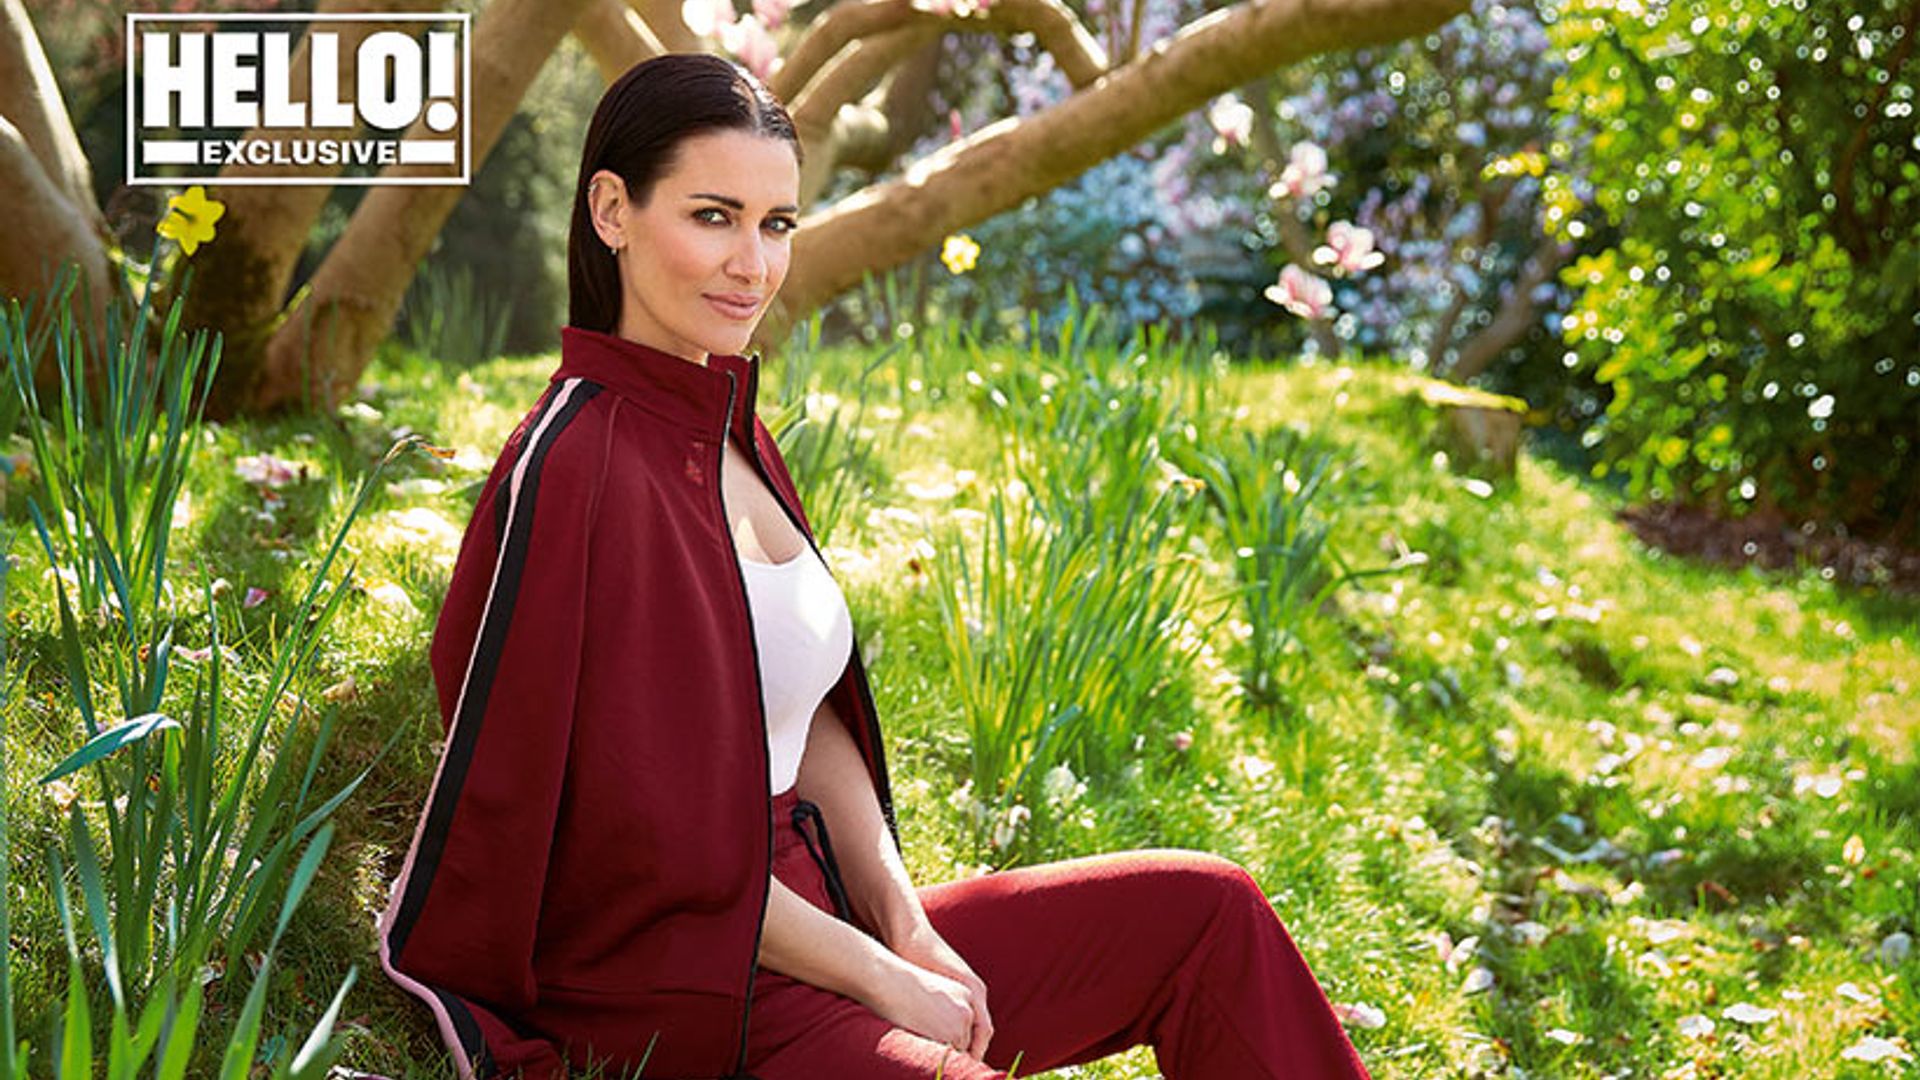 Kirsty Gallacher revealed her ‘tough’ training regime as she prepares for the London Marathon